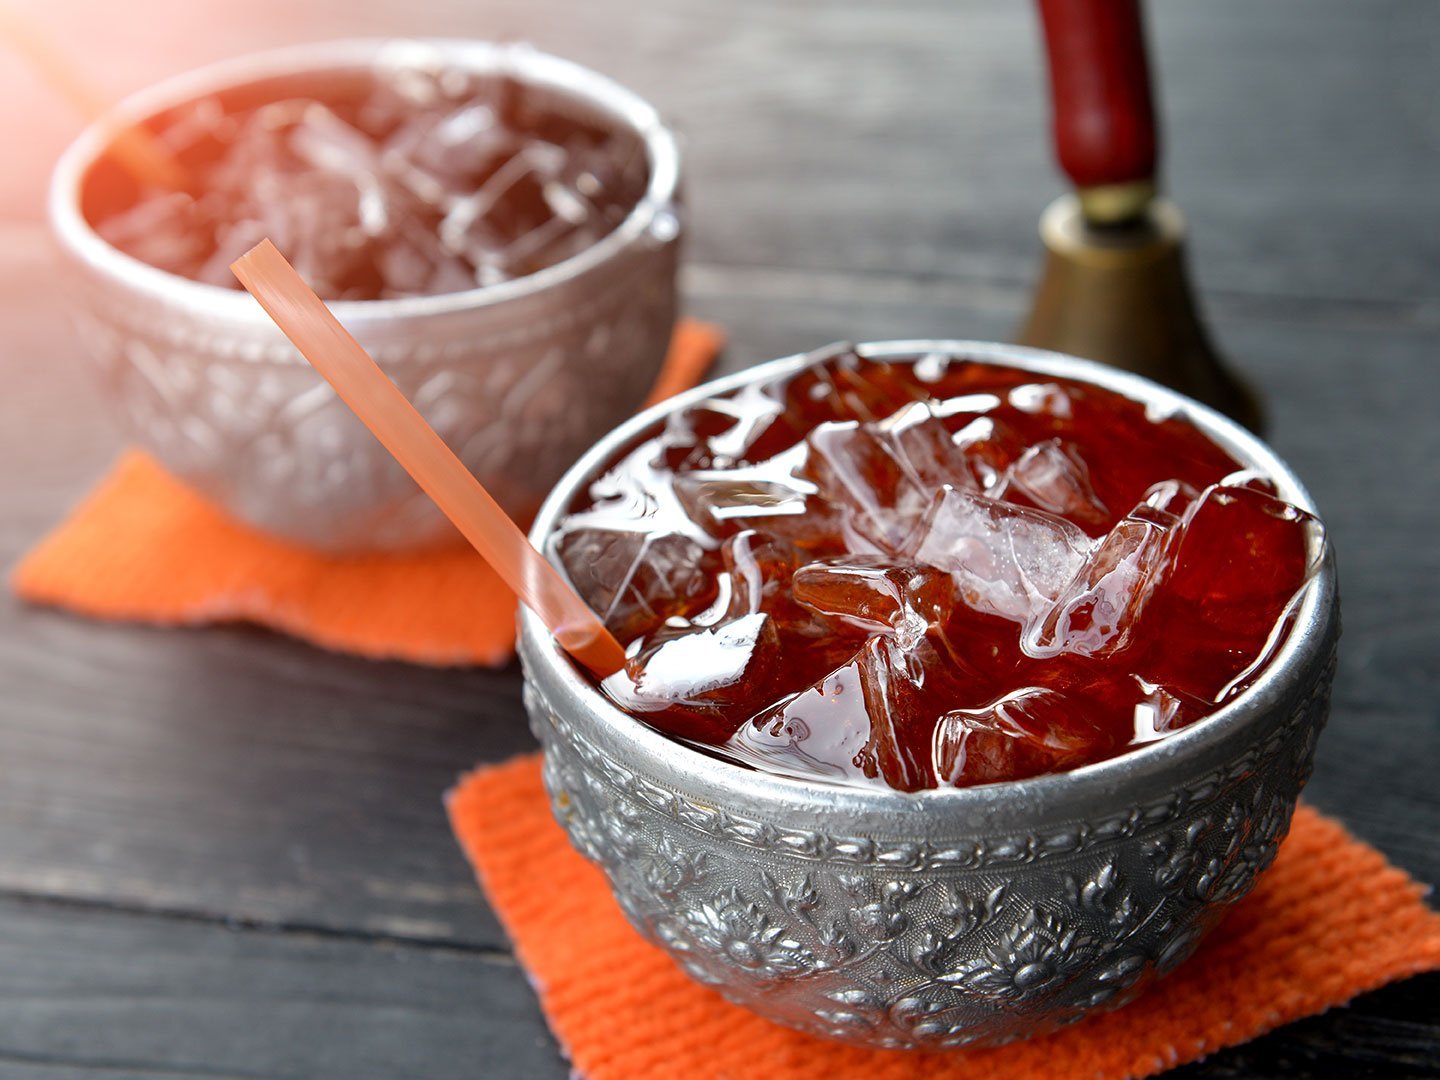 Black Or Red Thai Ice Tea Drink In The Silver Bowl .